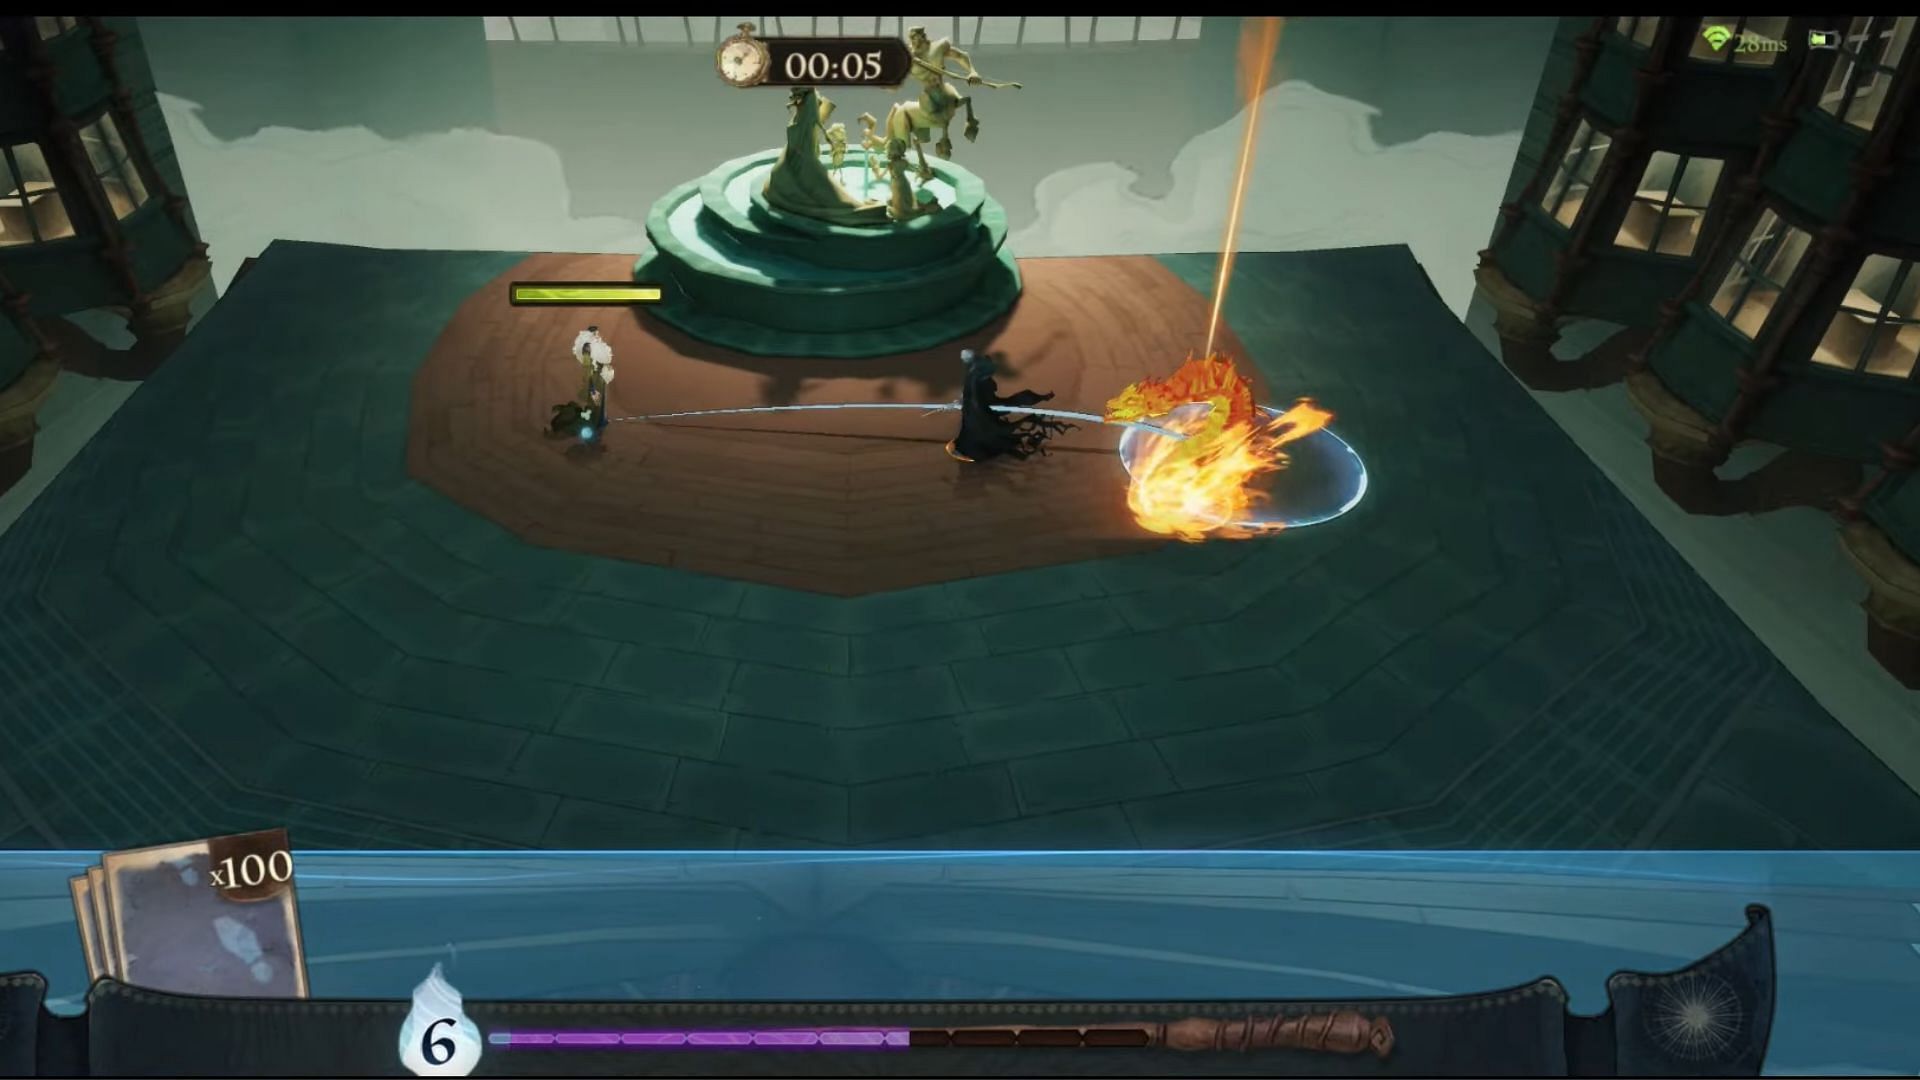 Players get to play as Dumbledore to defeat Voldemort (Image via Harry Potter Magic Awakened)